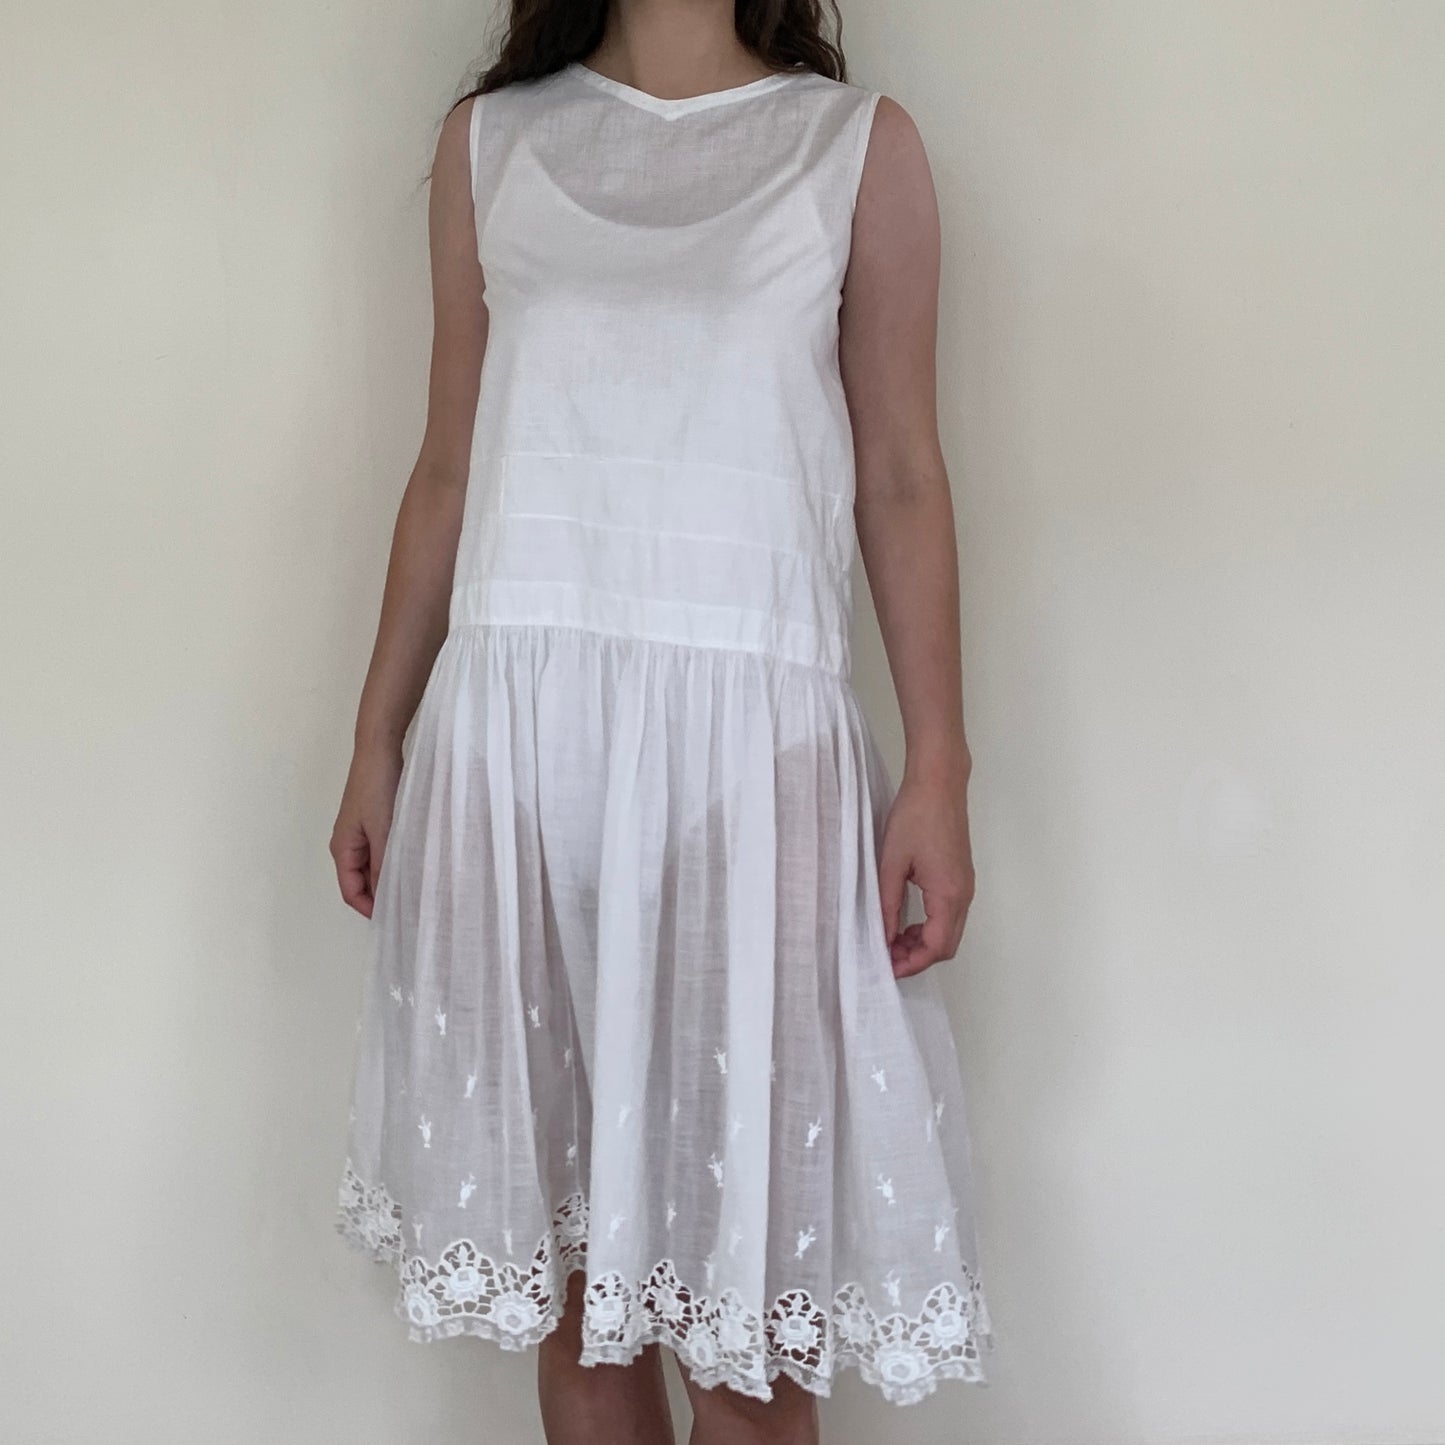 girls white cotton victorian nightgown worn on a person standing forward